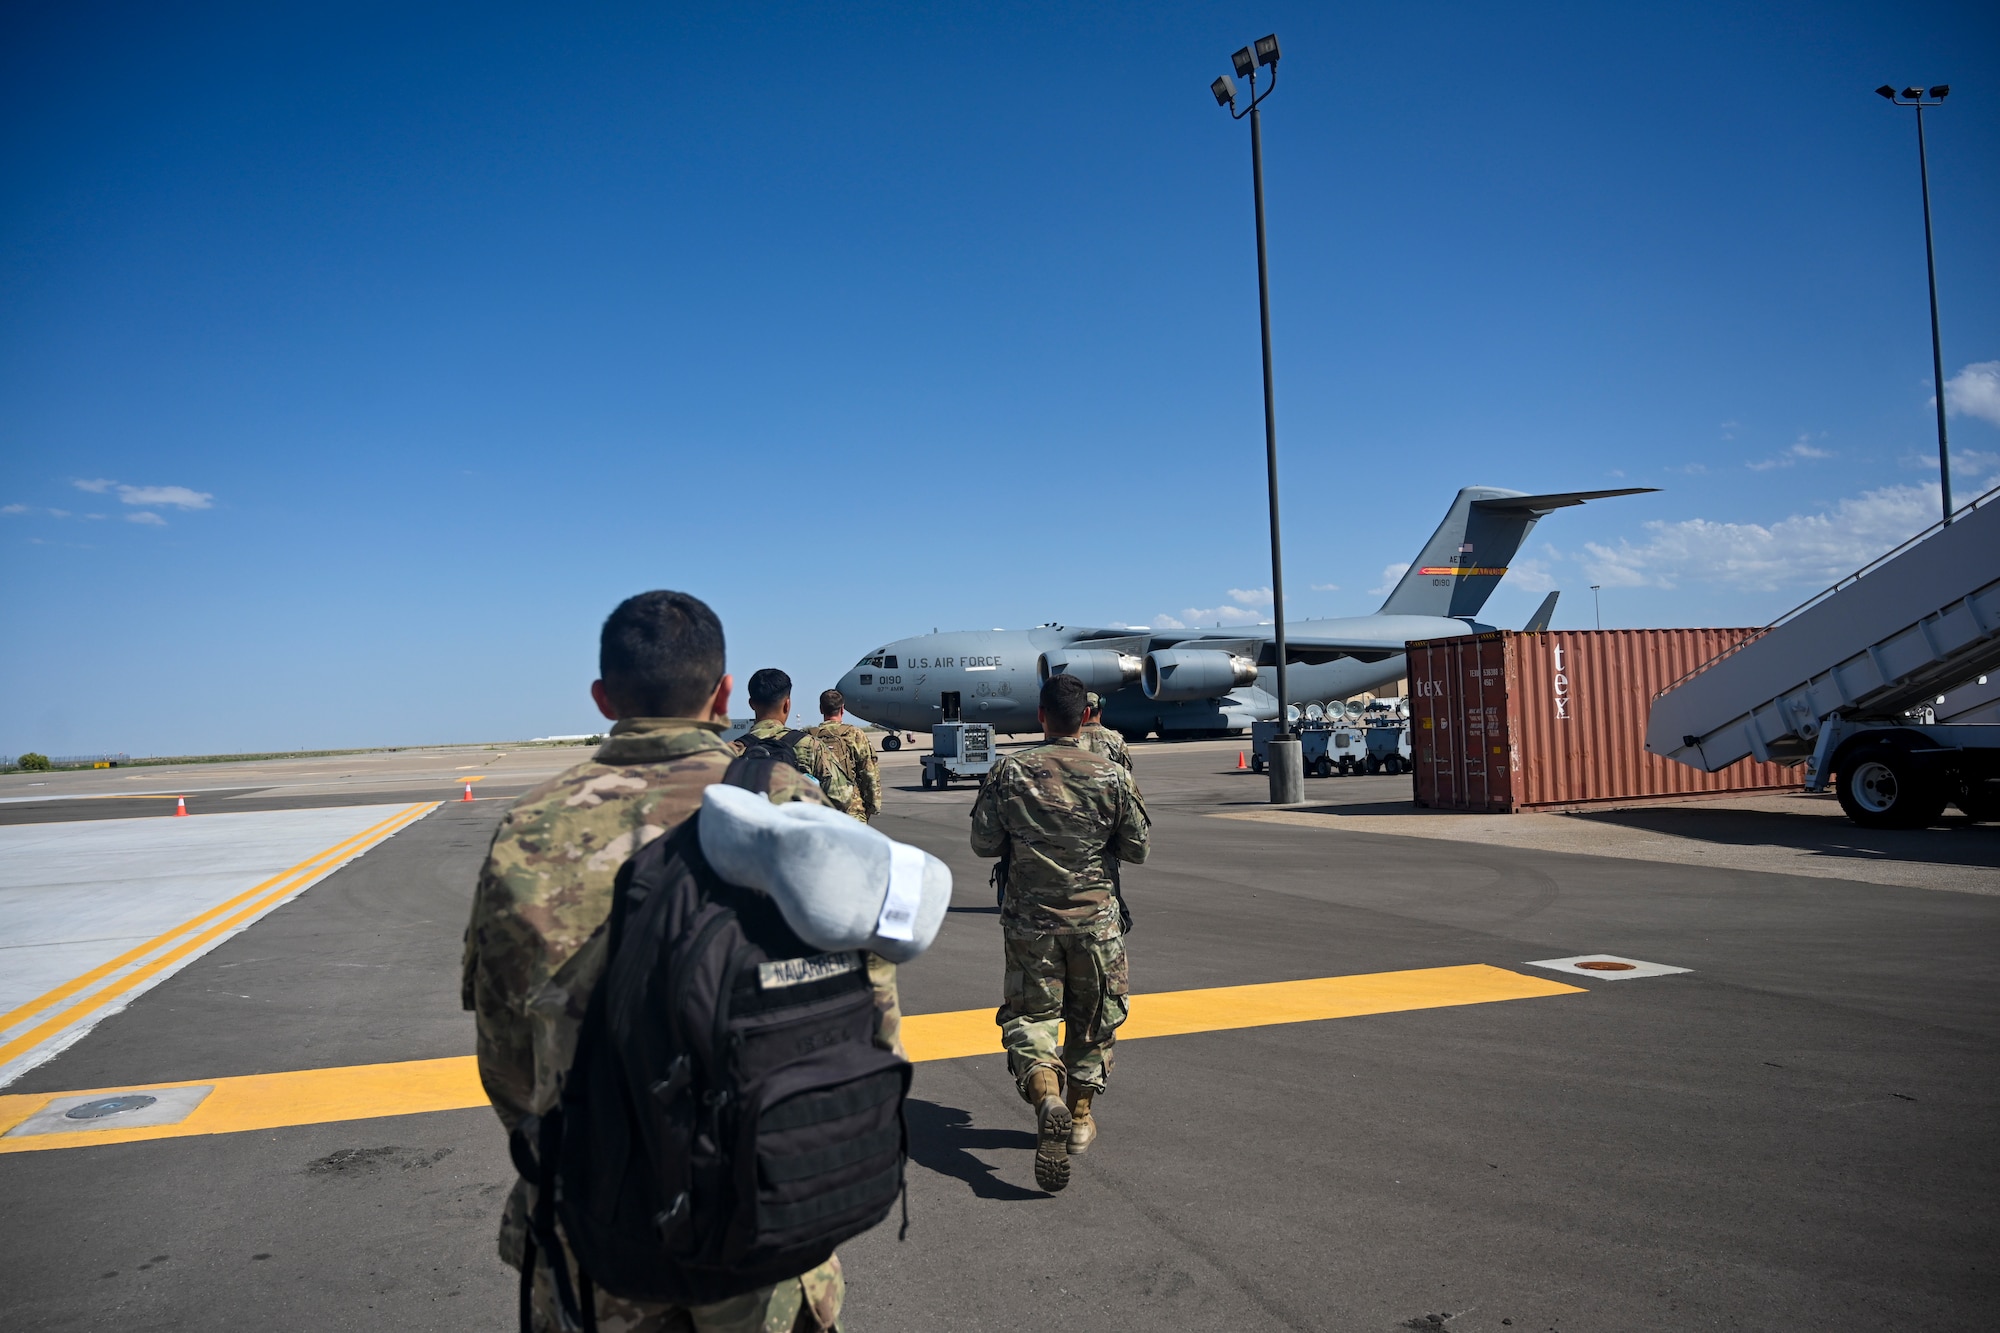 Airmen supporting exercise agile combat employment reaper from Holloman Air Force Base board a C-17 Sept. 8, 2021, Holloman AFB, New Mexico.